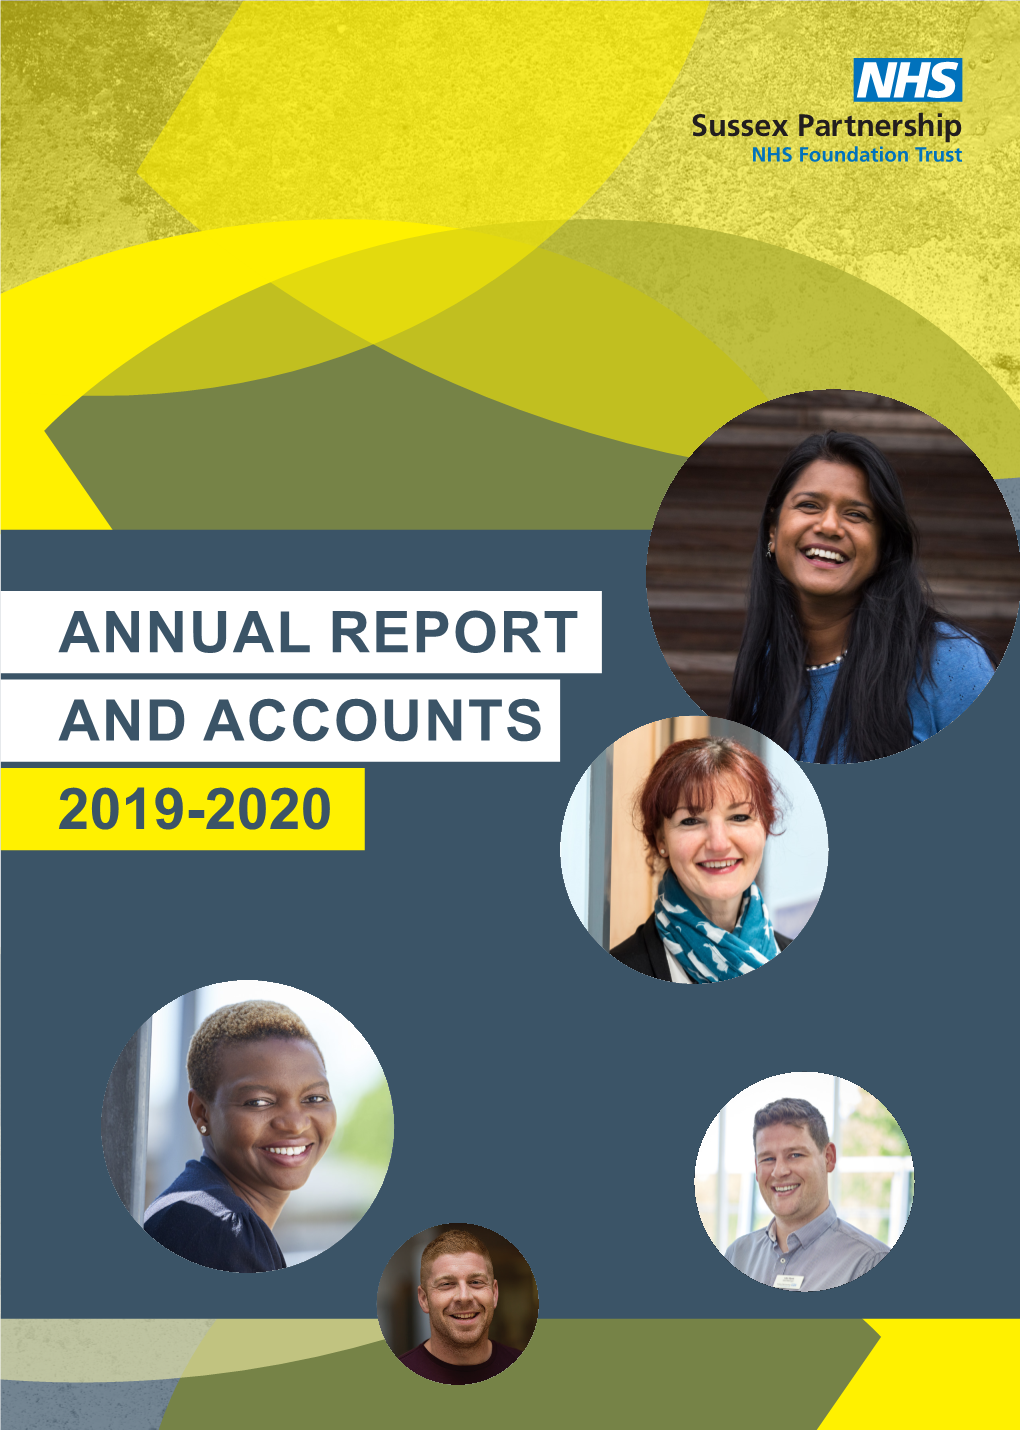 Annual Report and Accounts 2019-2020